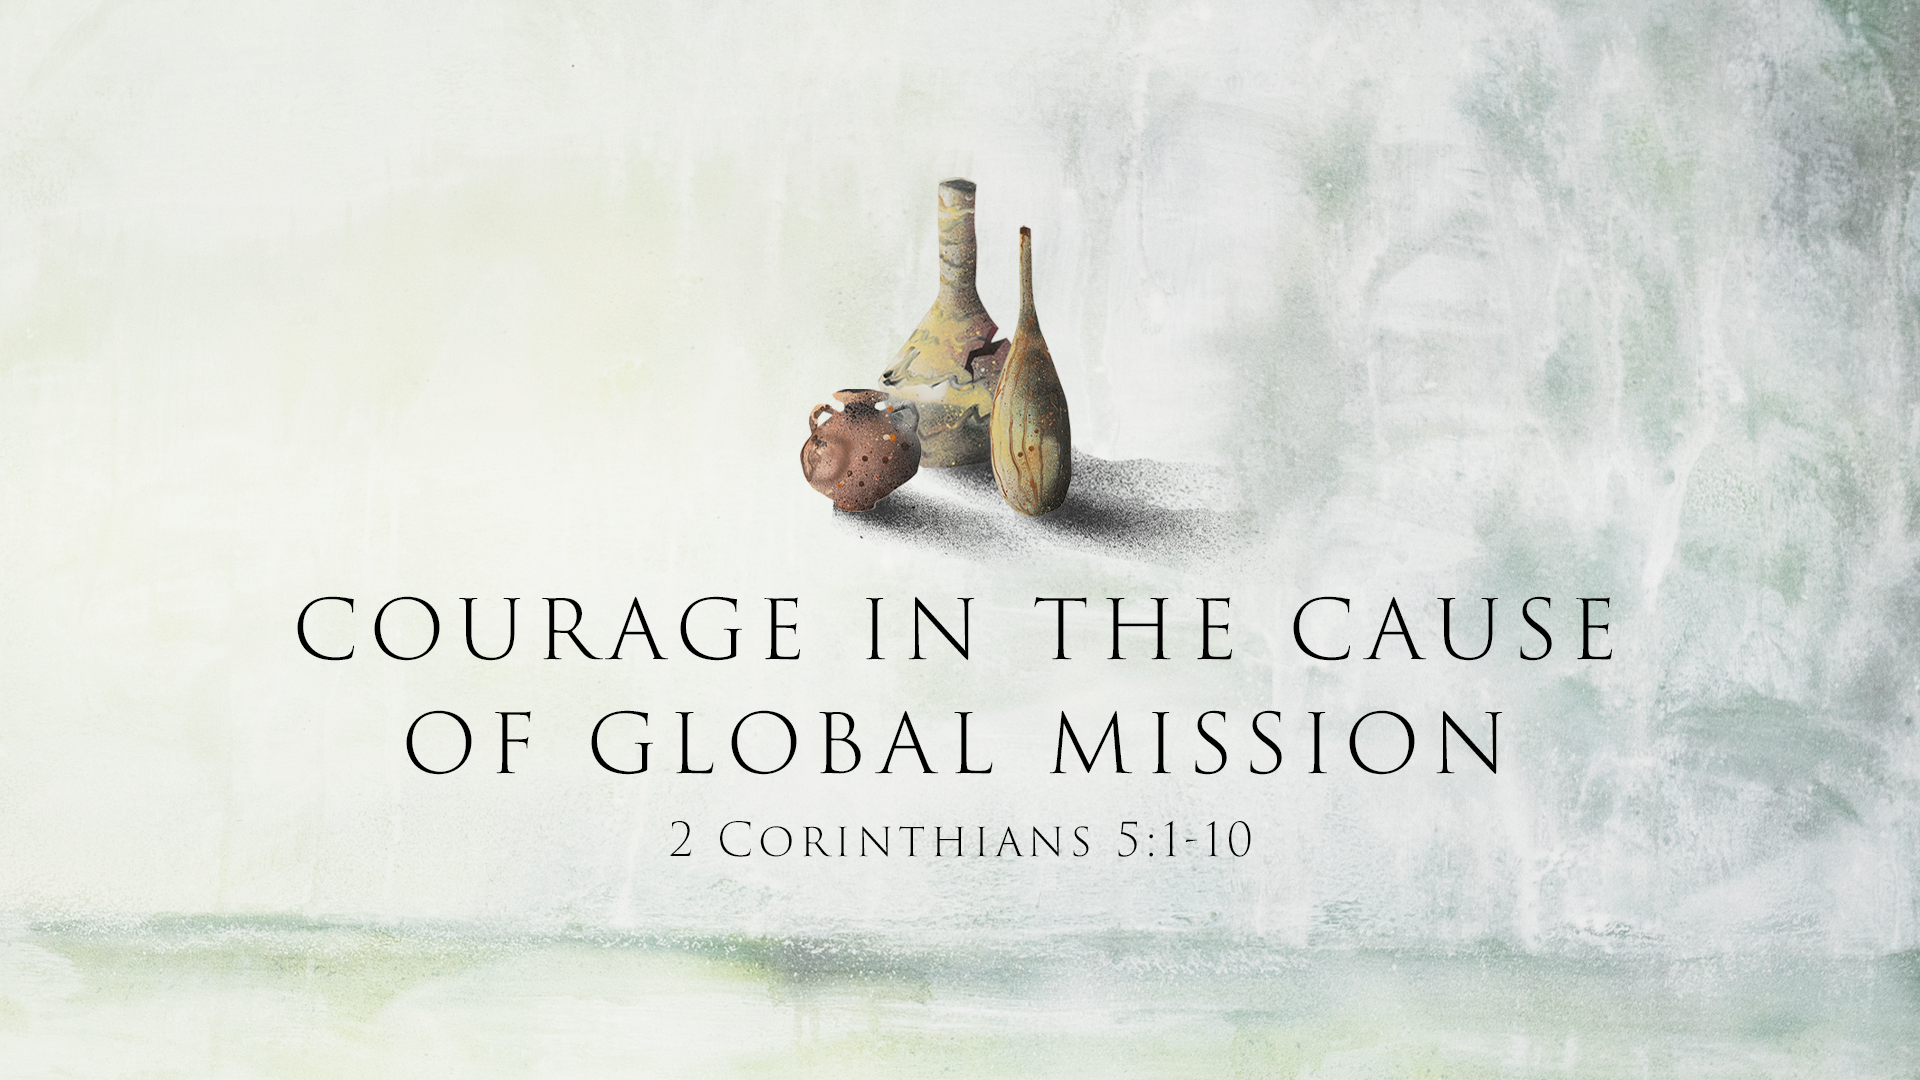 Don’t Hold Back: Courage in the Cause of Global Mission